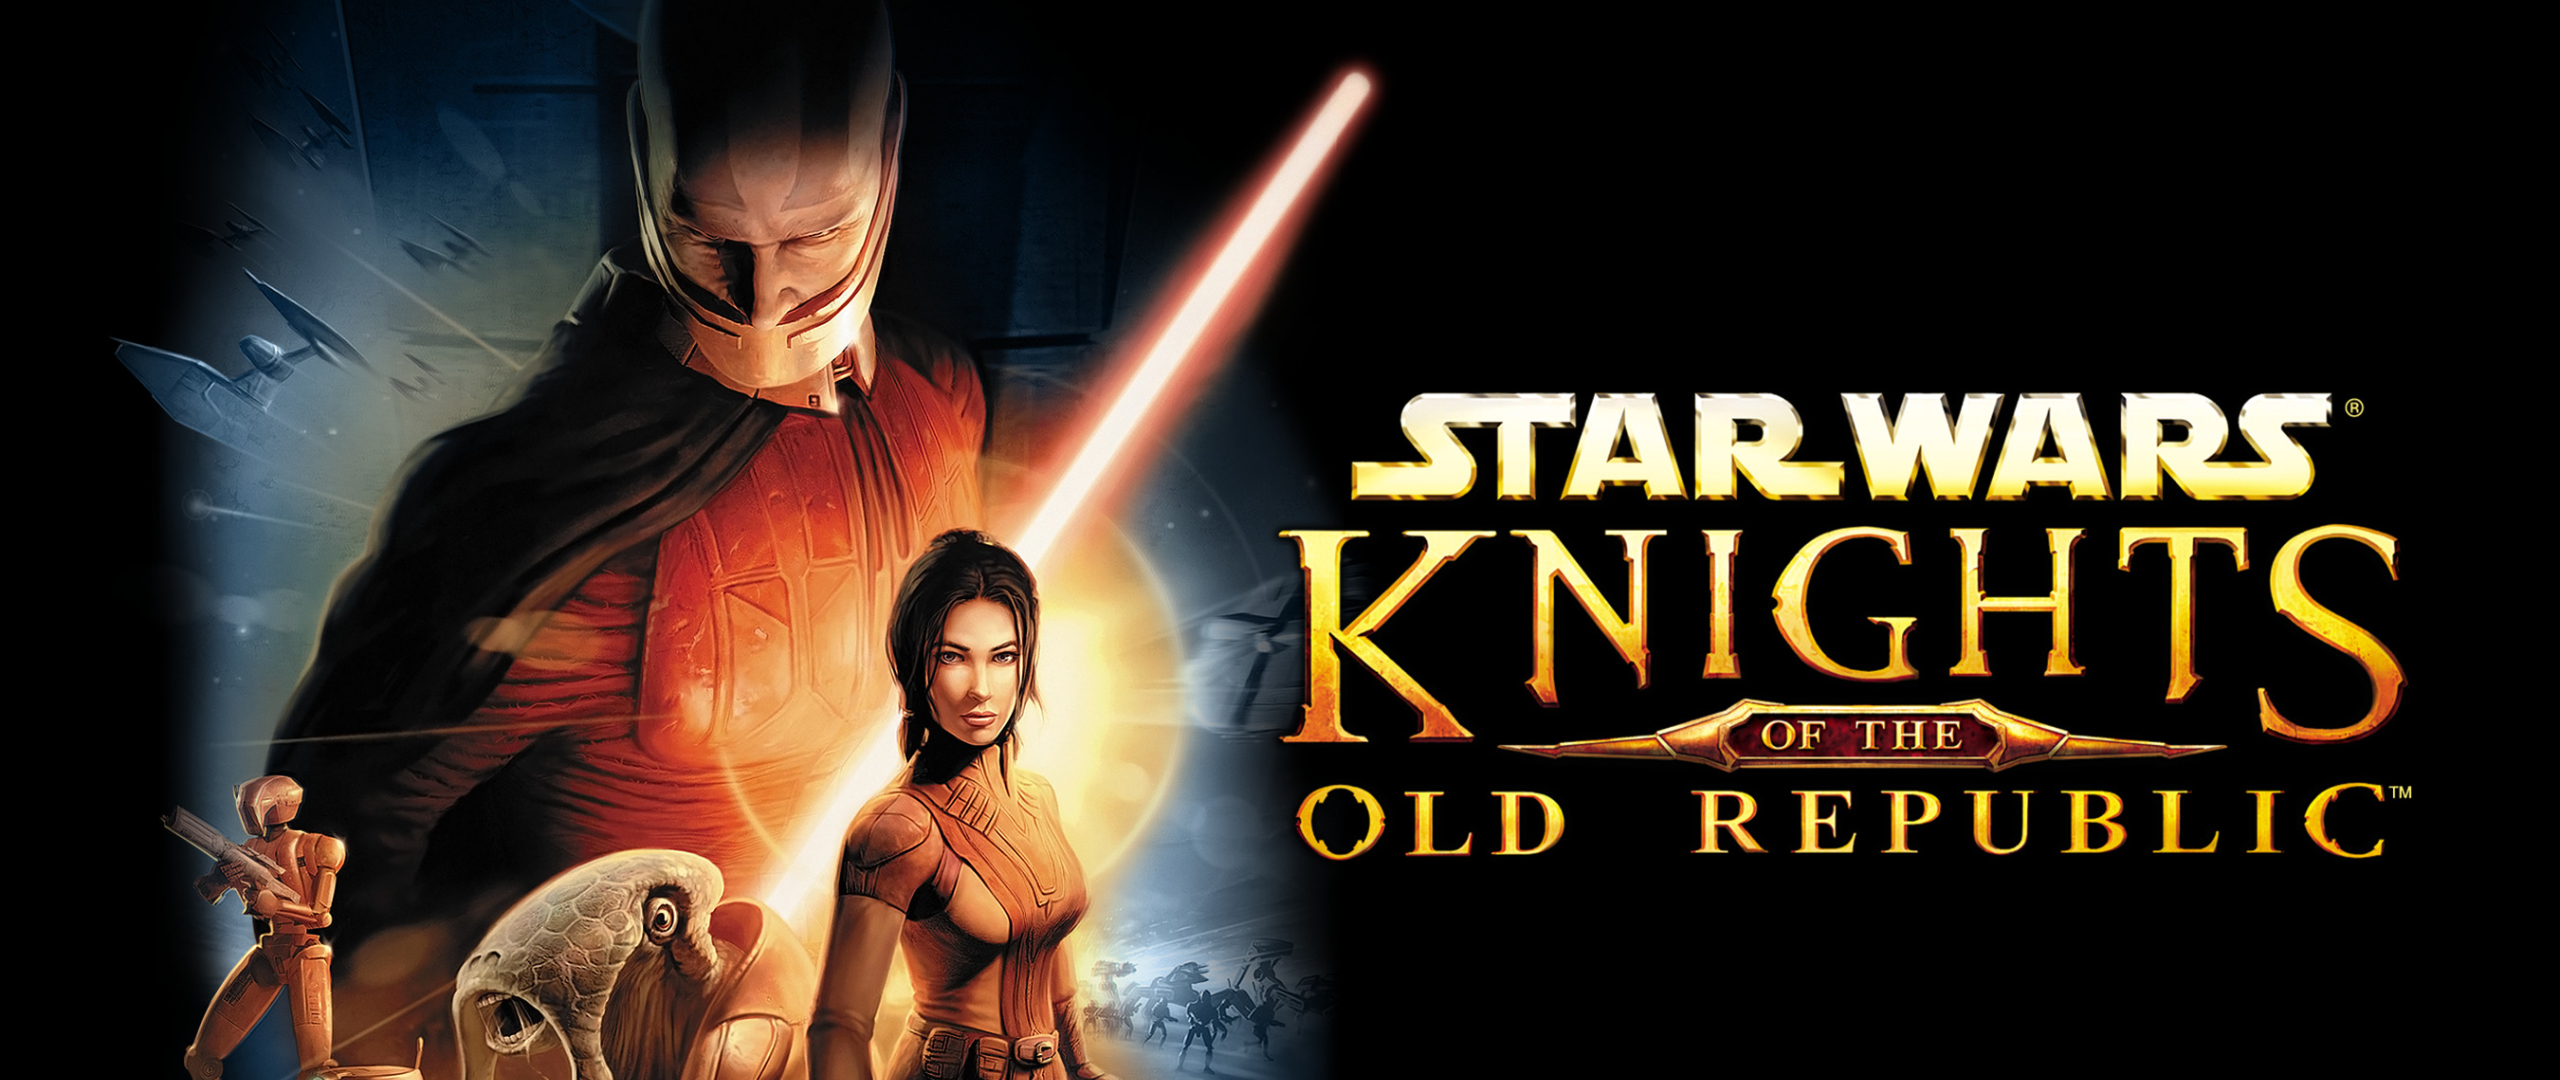 Star wars knight of the old republic 2 русификатор steam фото 115